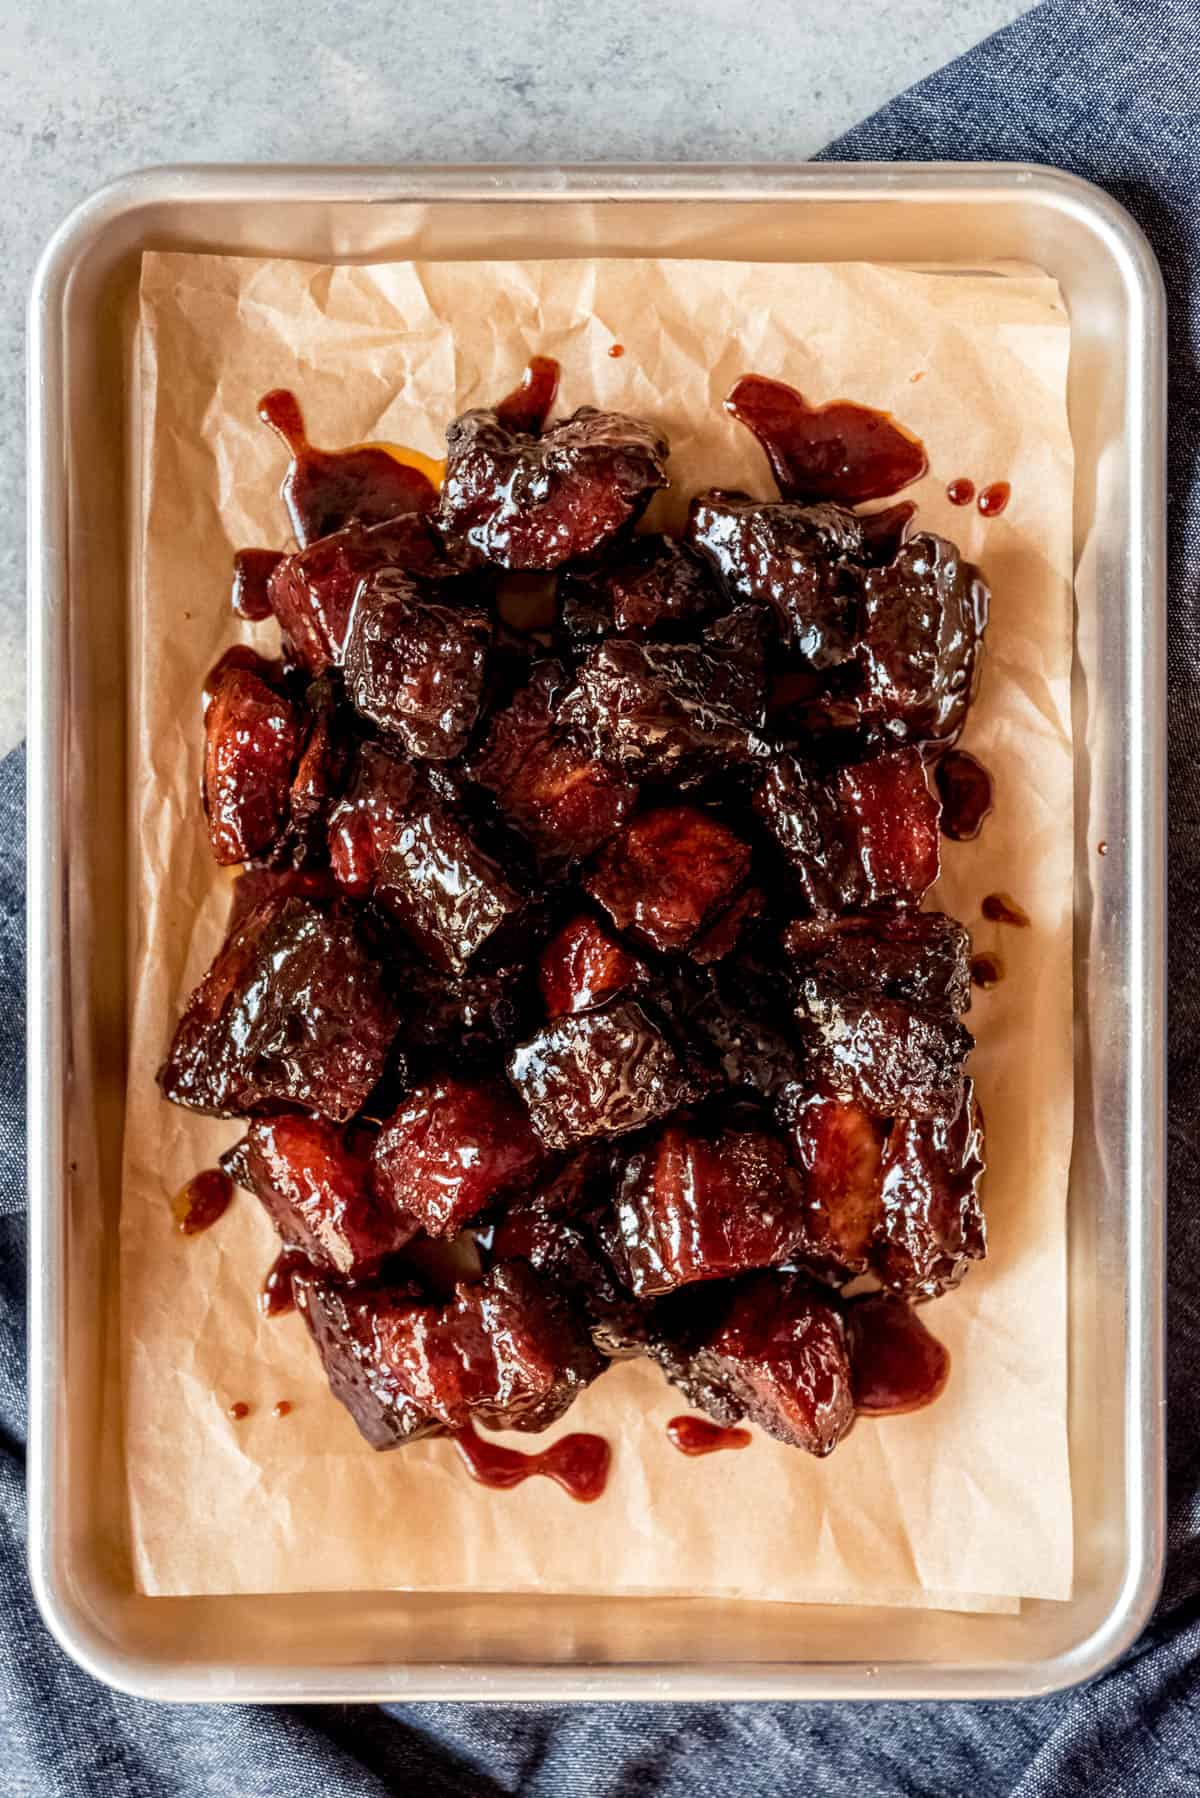 An image of cubes of pork belly that has been smoked on a Traeger grill and covered in barbecue sauce.